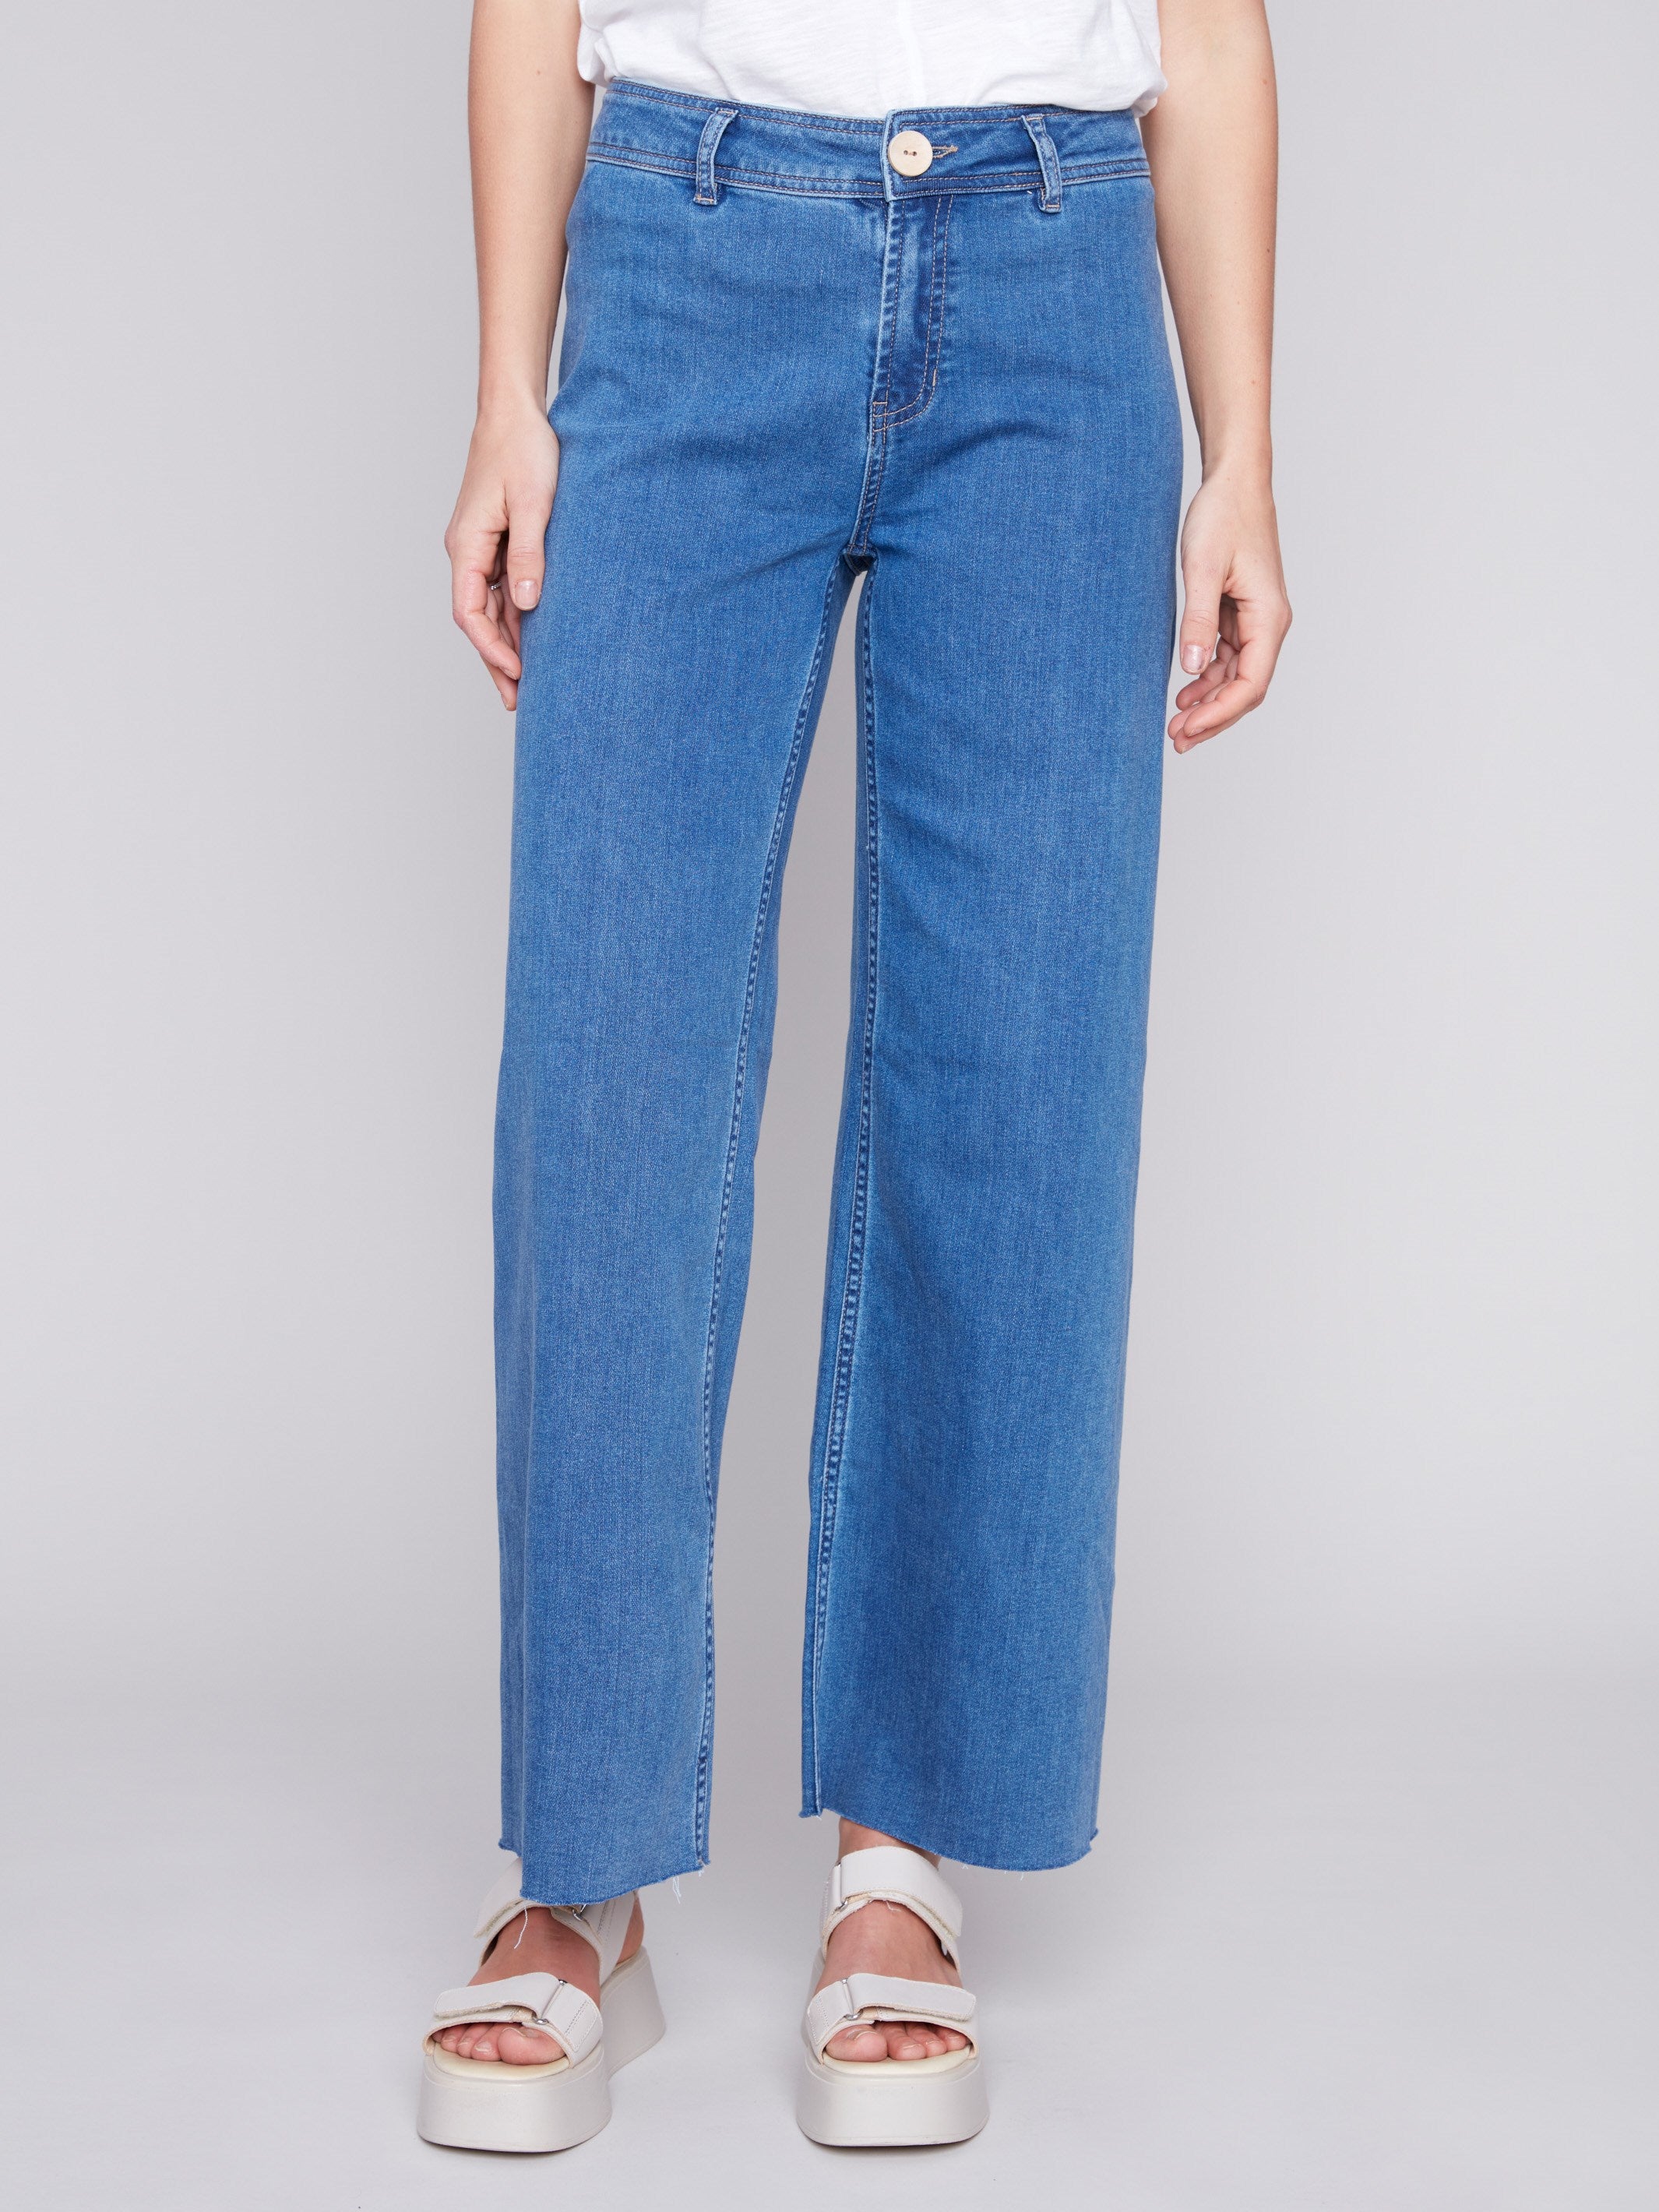 Wide Leg Jeans with Raw Hem - Medium Blue - Charlie B Collection Canada - Image 2